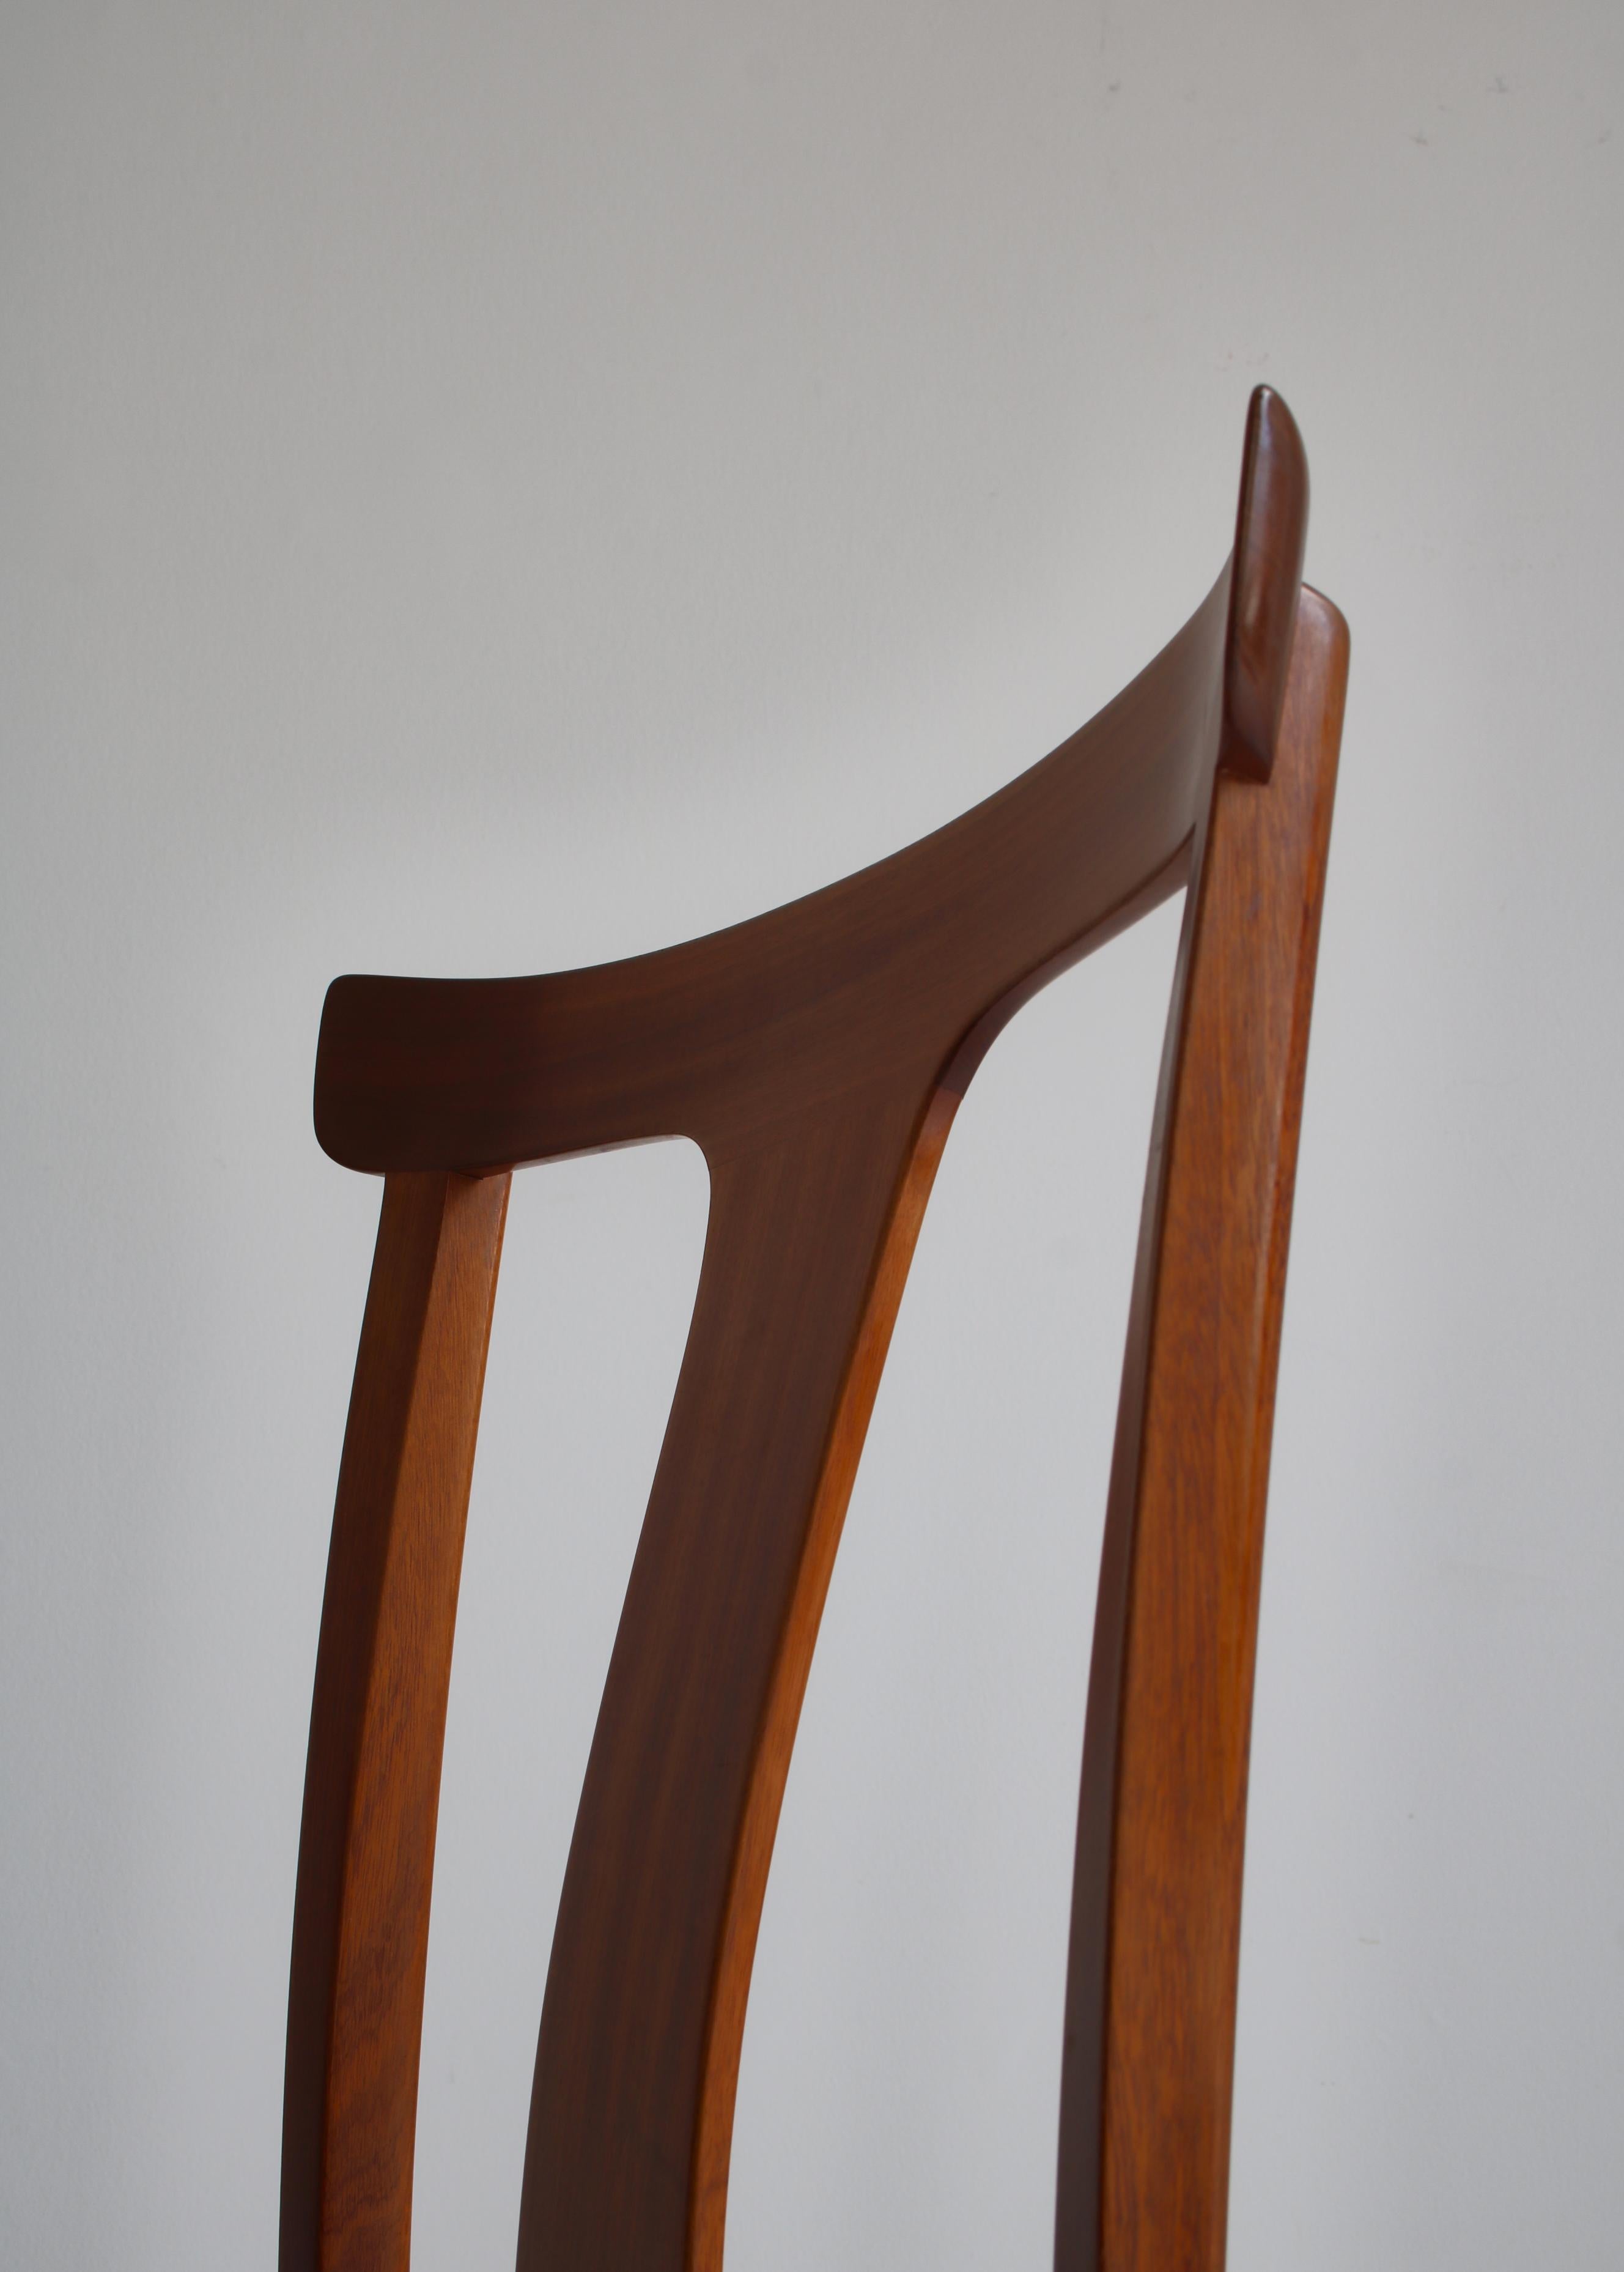 Ole Wanscher Dining Chairs in Mahogany and Horsehair Made by A.J. Iversen, 1960s For Sale 12